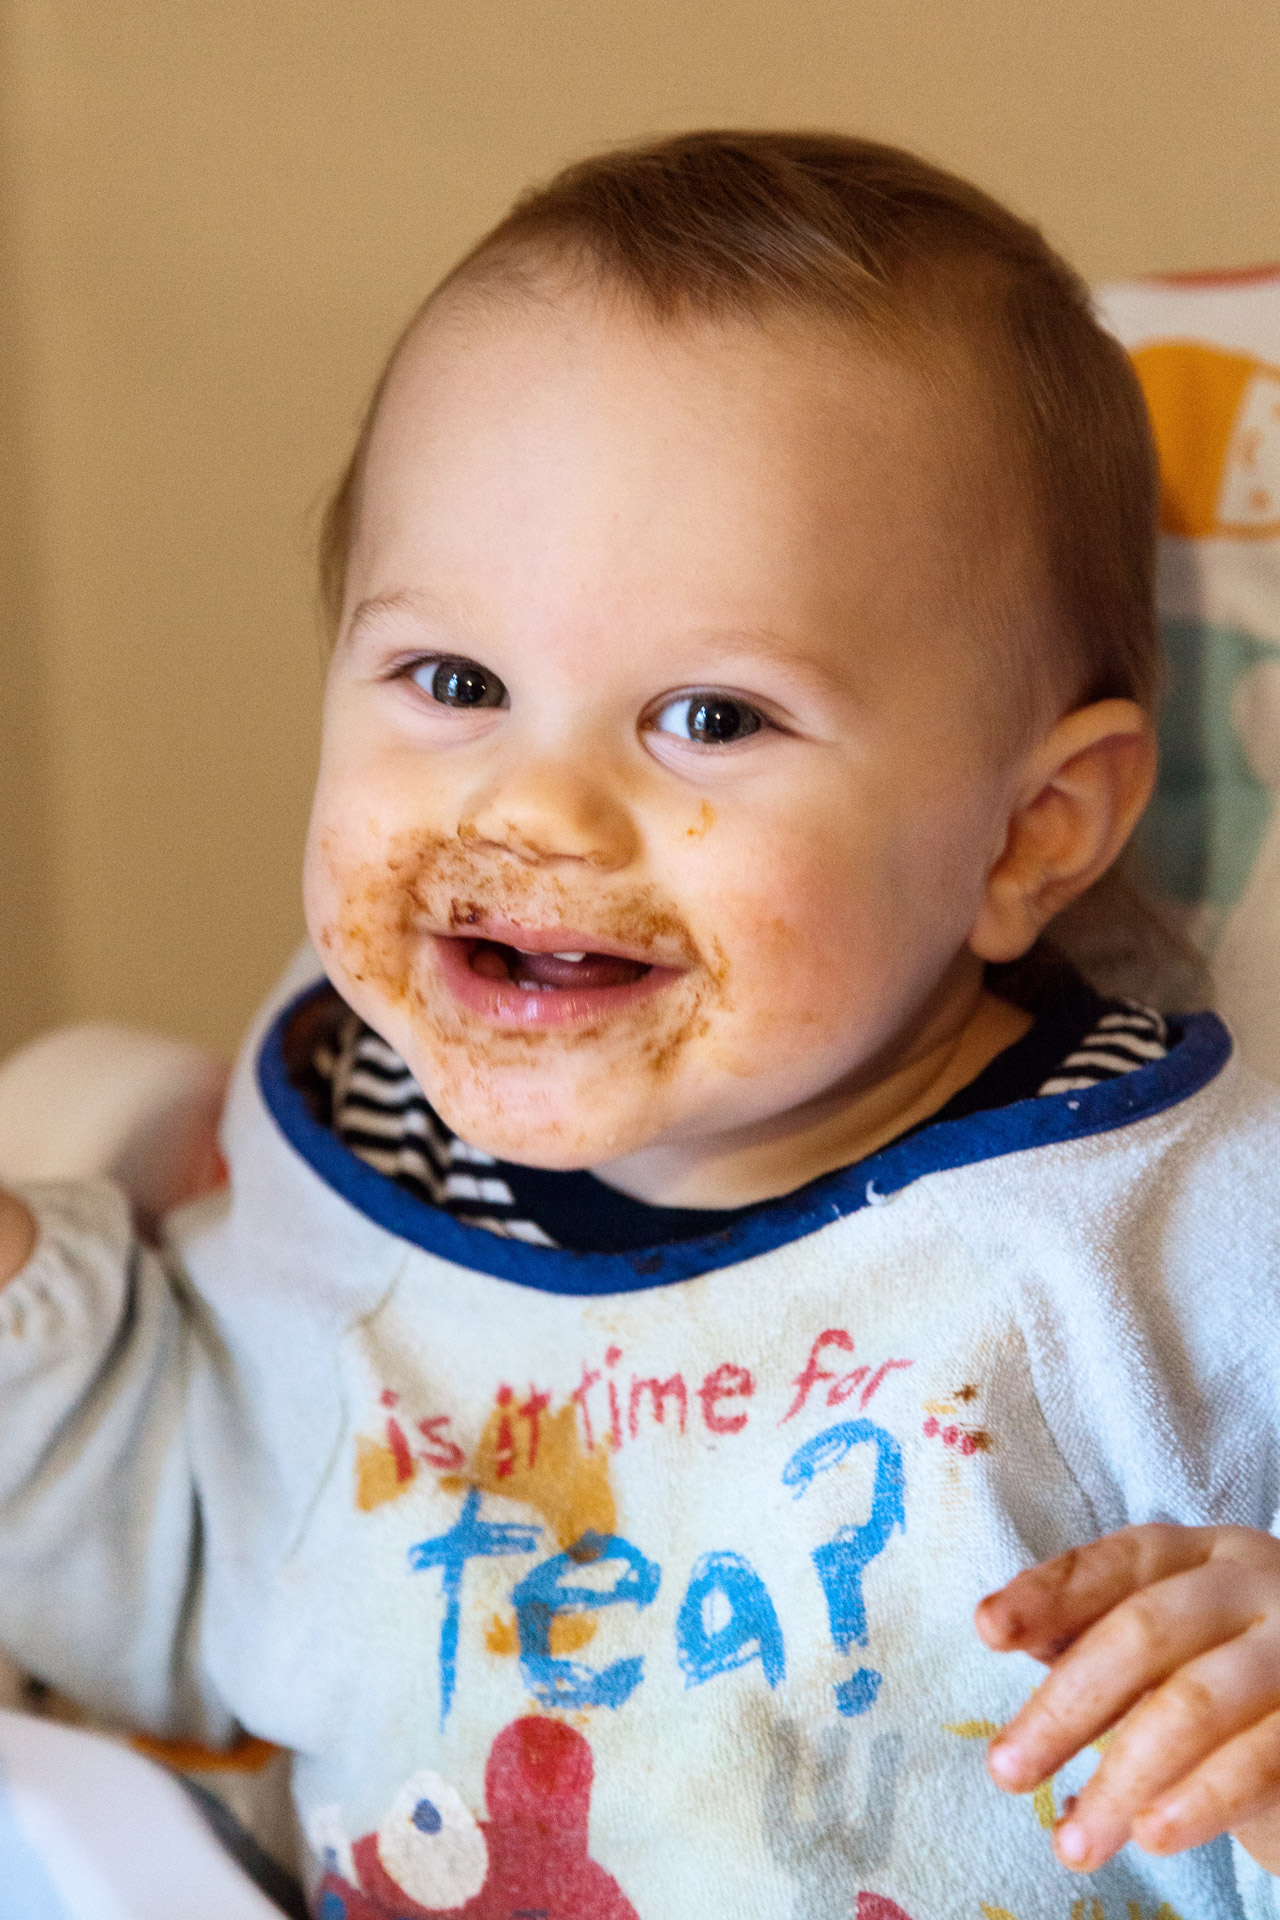 baby happy after eating healthy food 